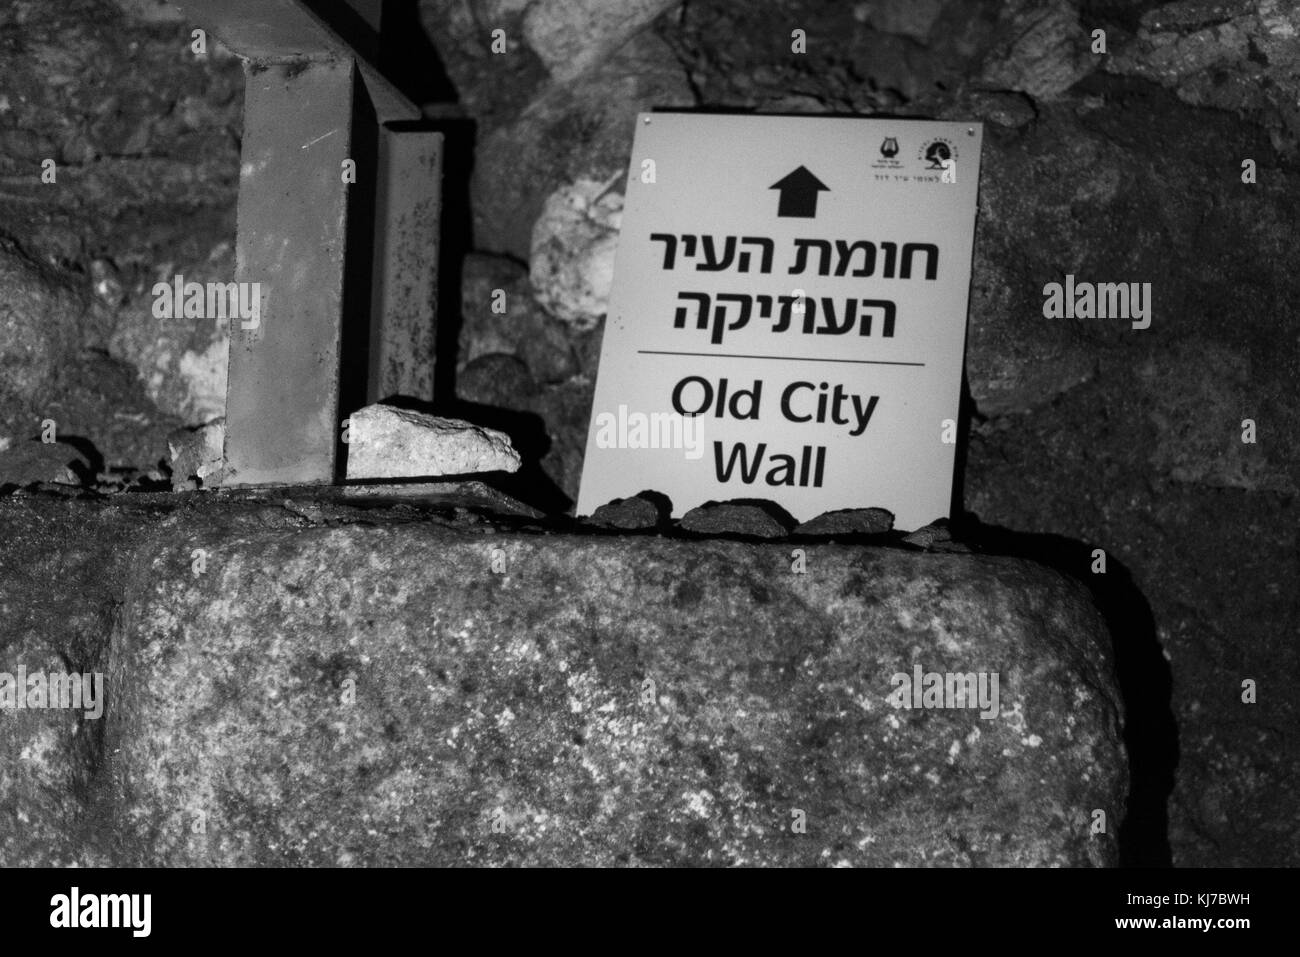 Close-up of directional sign, Old City, Israel Stock Photo